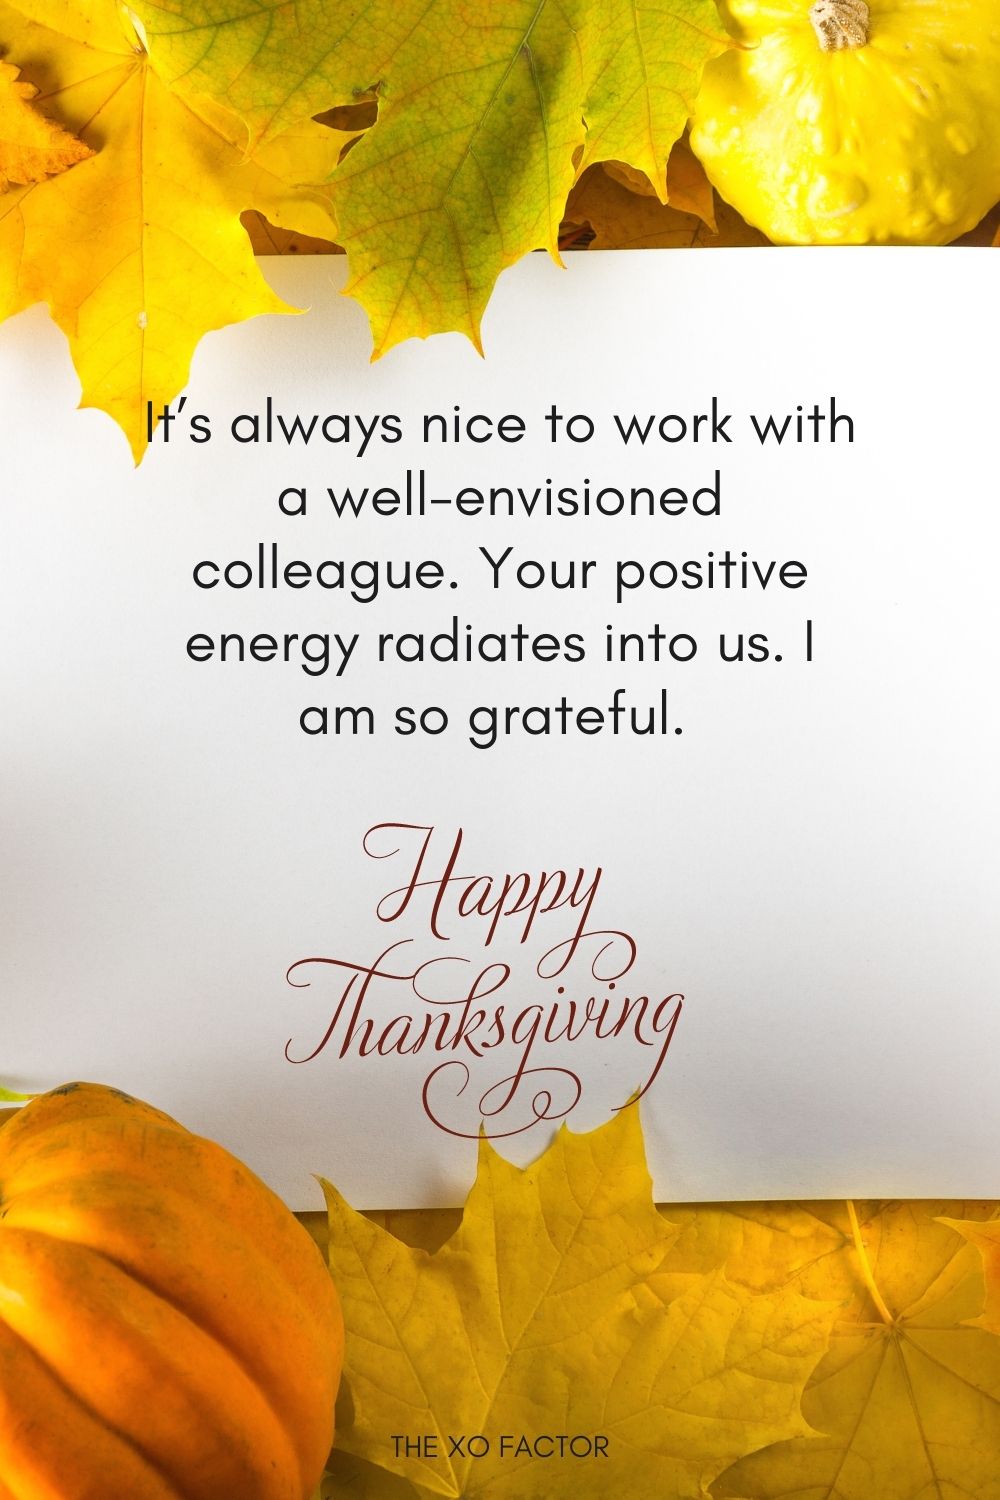 It’s always nice to work with a well-envisioned colleague. Your positive energy radiates into us. I am so grateful. Happy Thanksgiving.